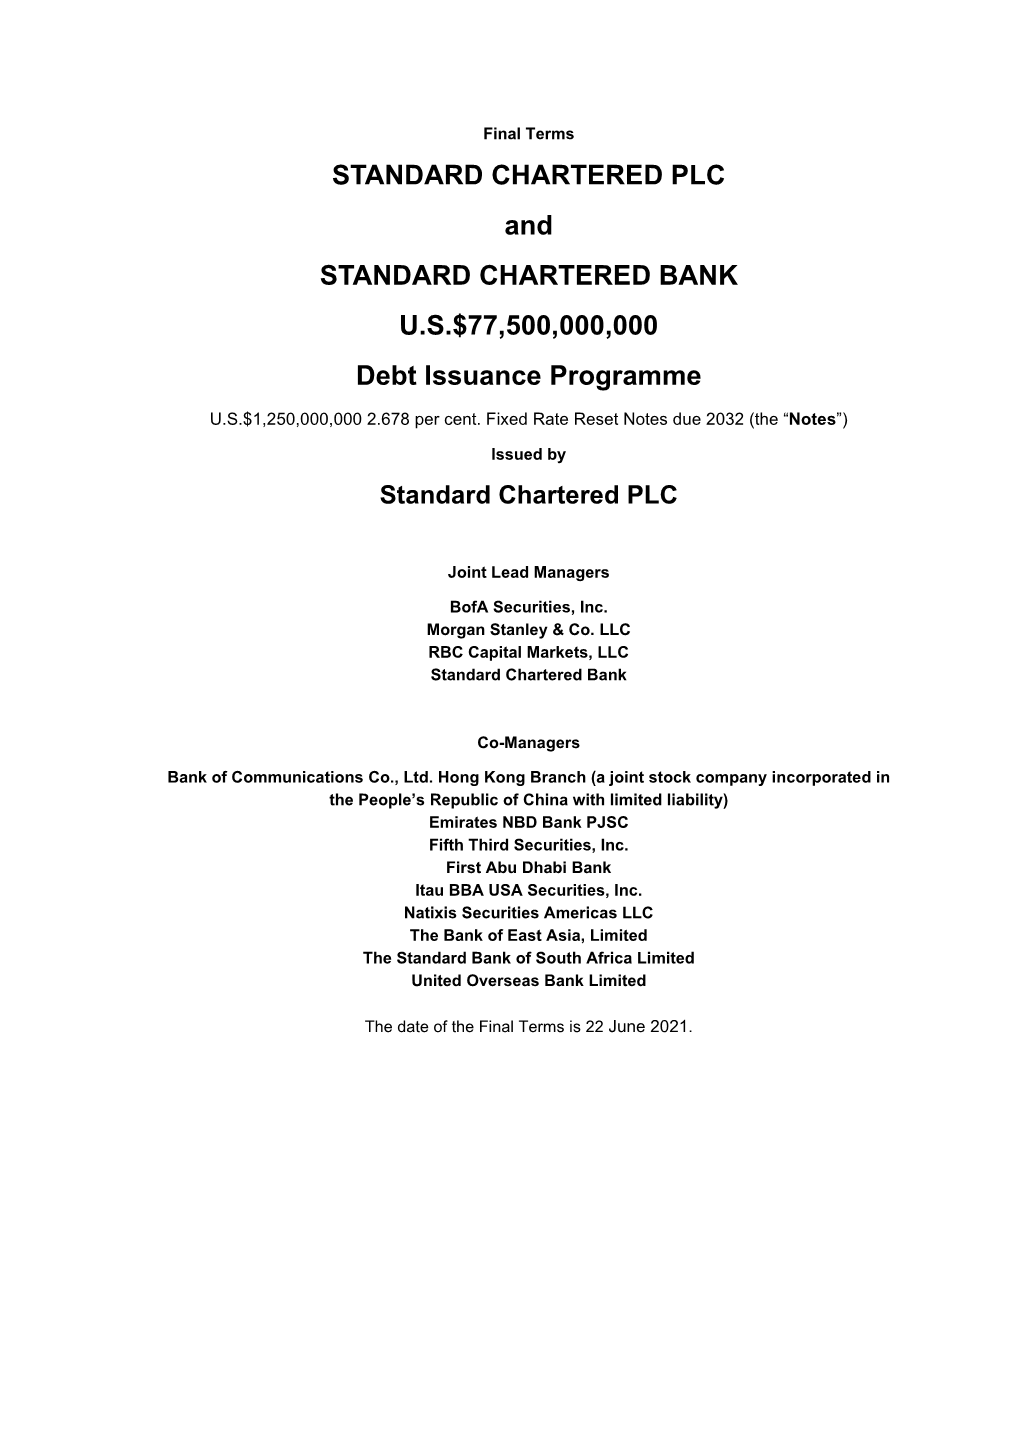 STANDARD CHARTERED PLC and STANDARD CHARTERED BANK U.S.$77,500,000,000 Debt Issuance Programme